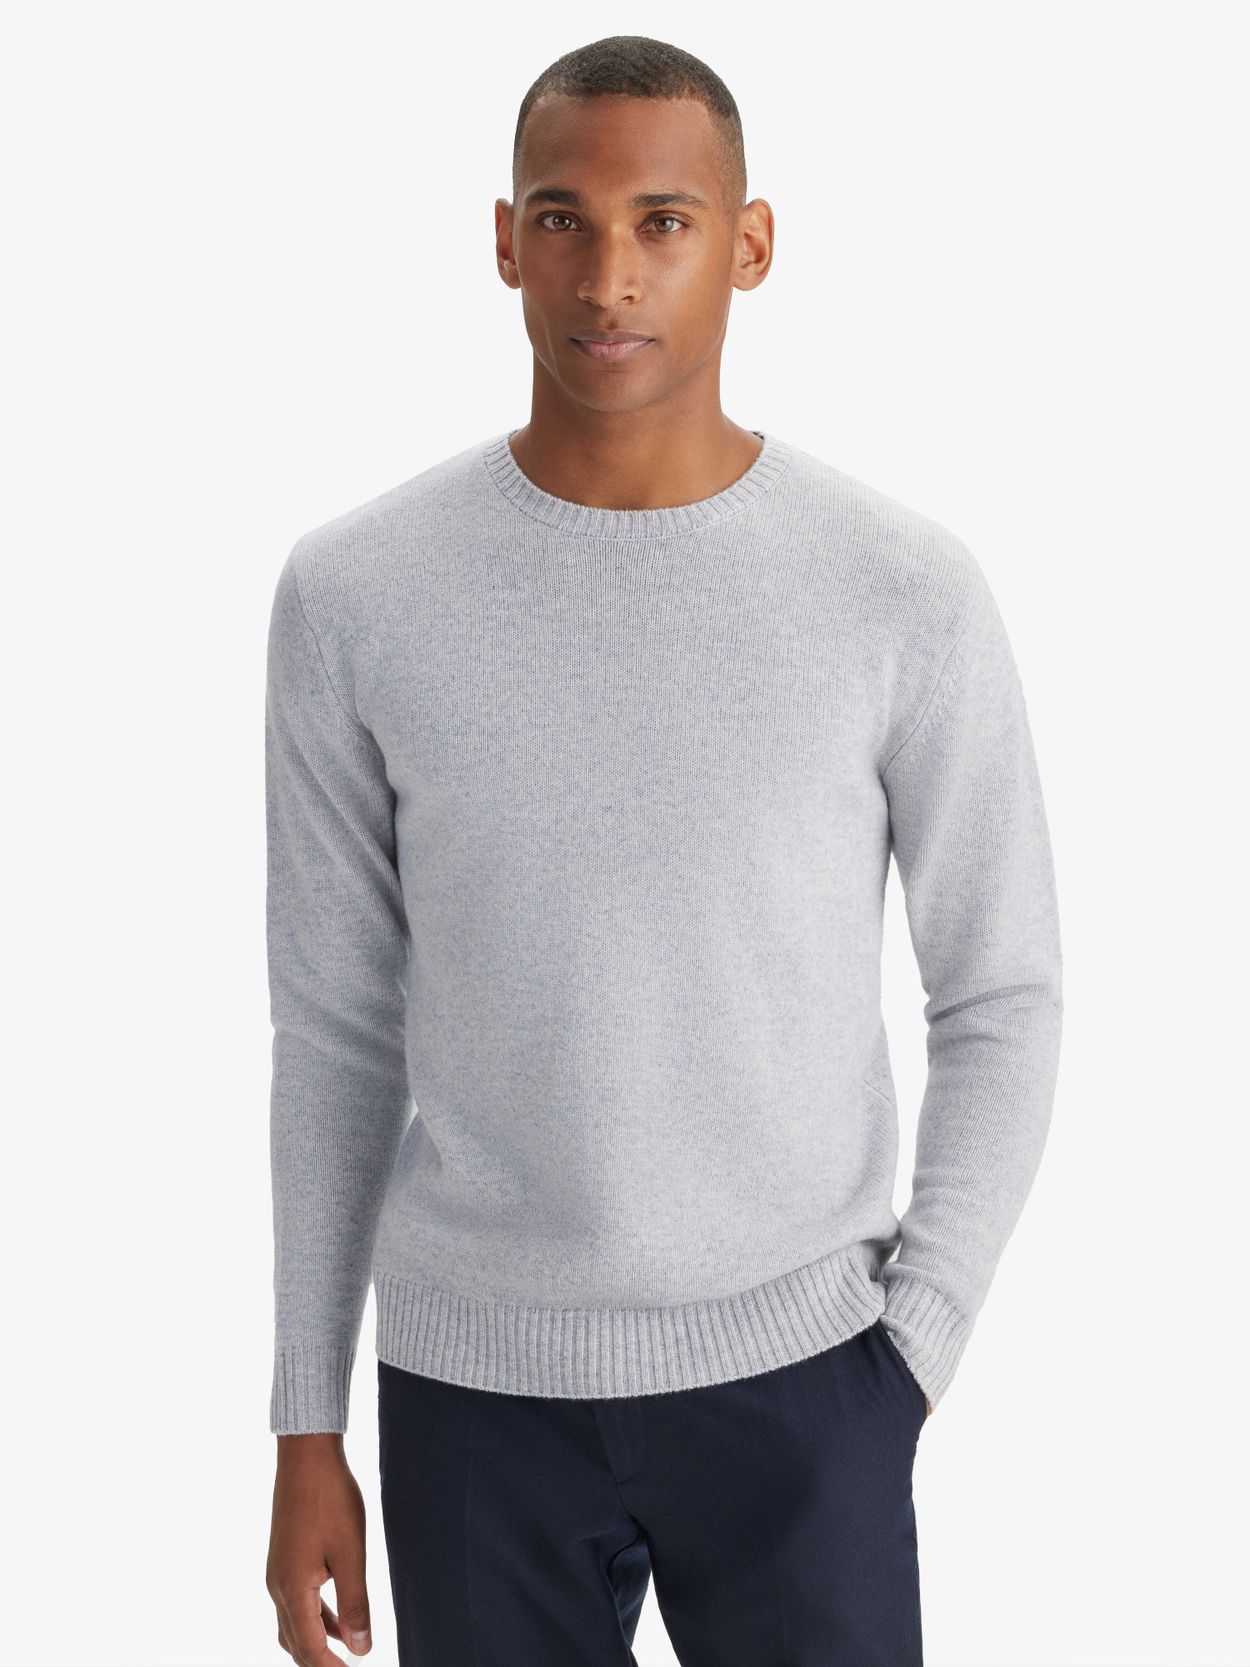 for Men Grey Cruciani Sweaters Light in Grey Mens Clothing Sweaters and knitwear Turtlenecks 